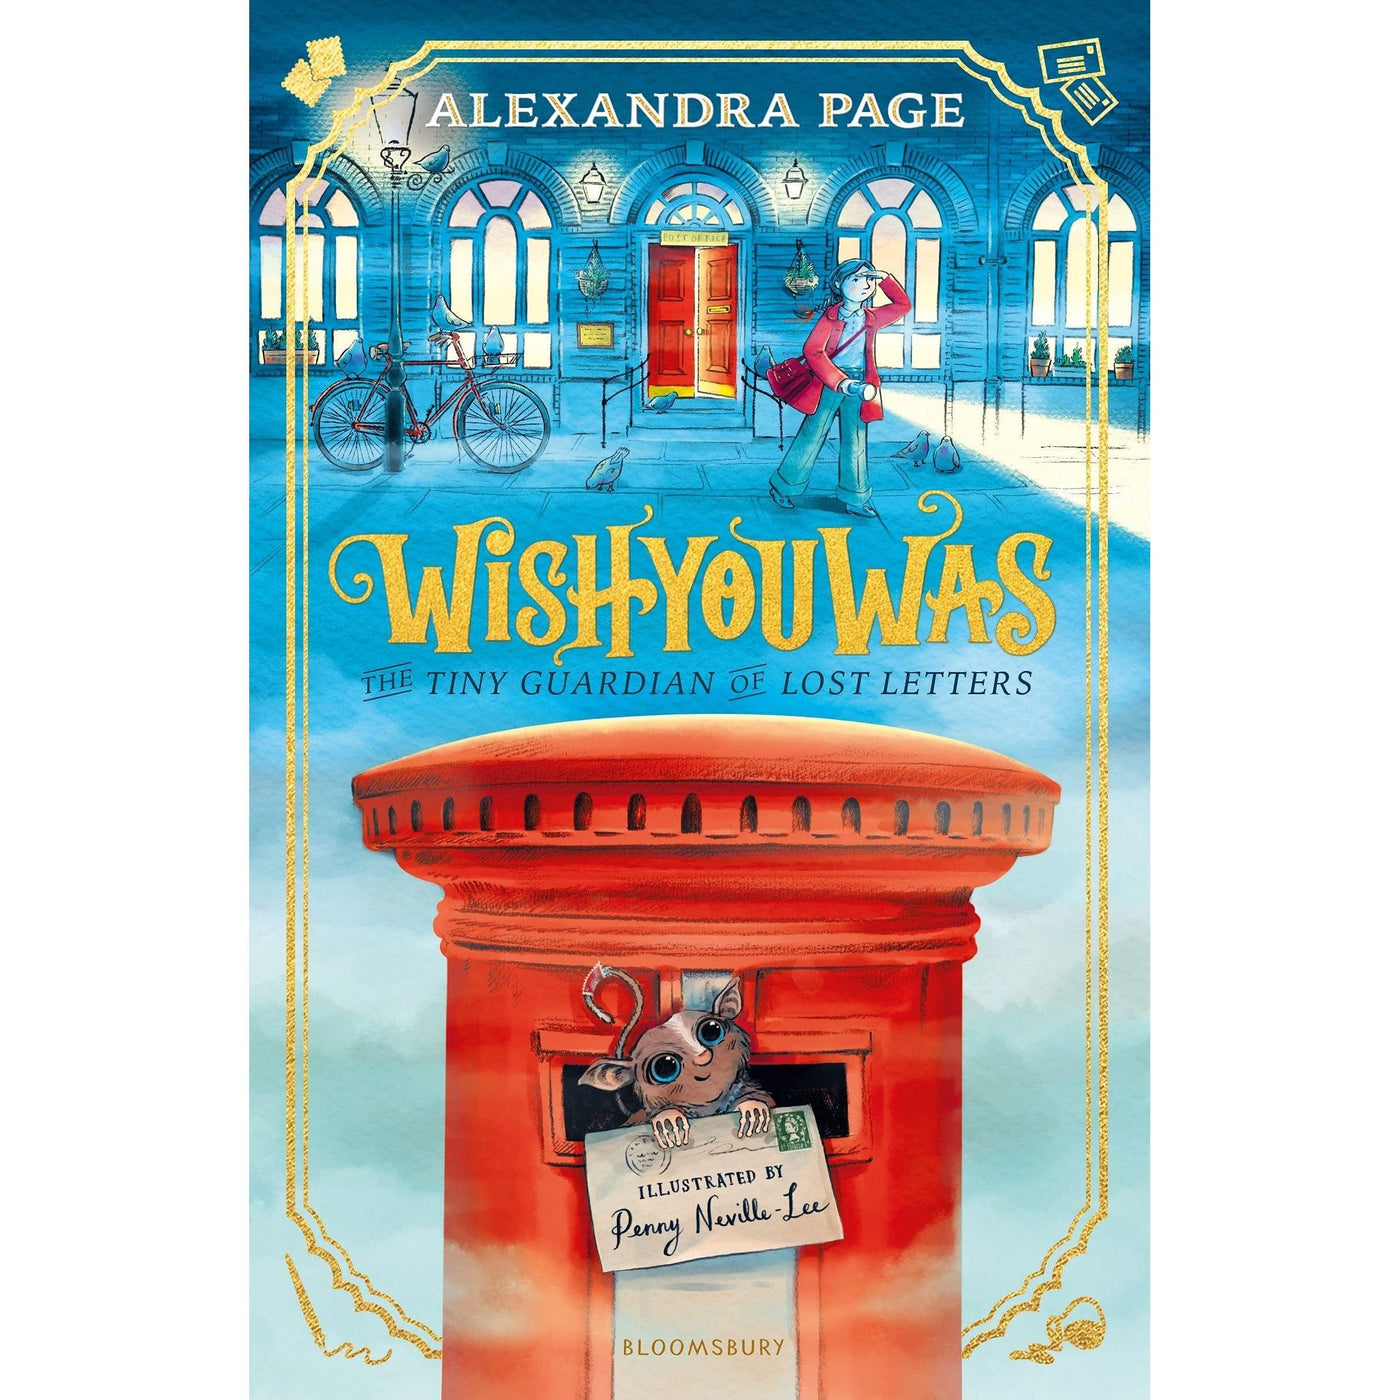 Wishyouwas : The Tiny Guardian Of Lost Letters - Alexandra Page & Penny Neville-Lee